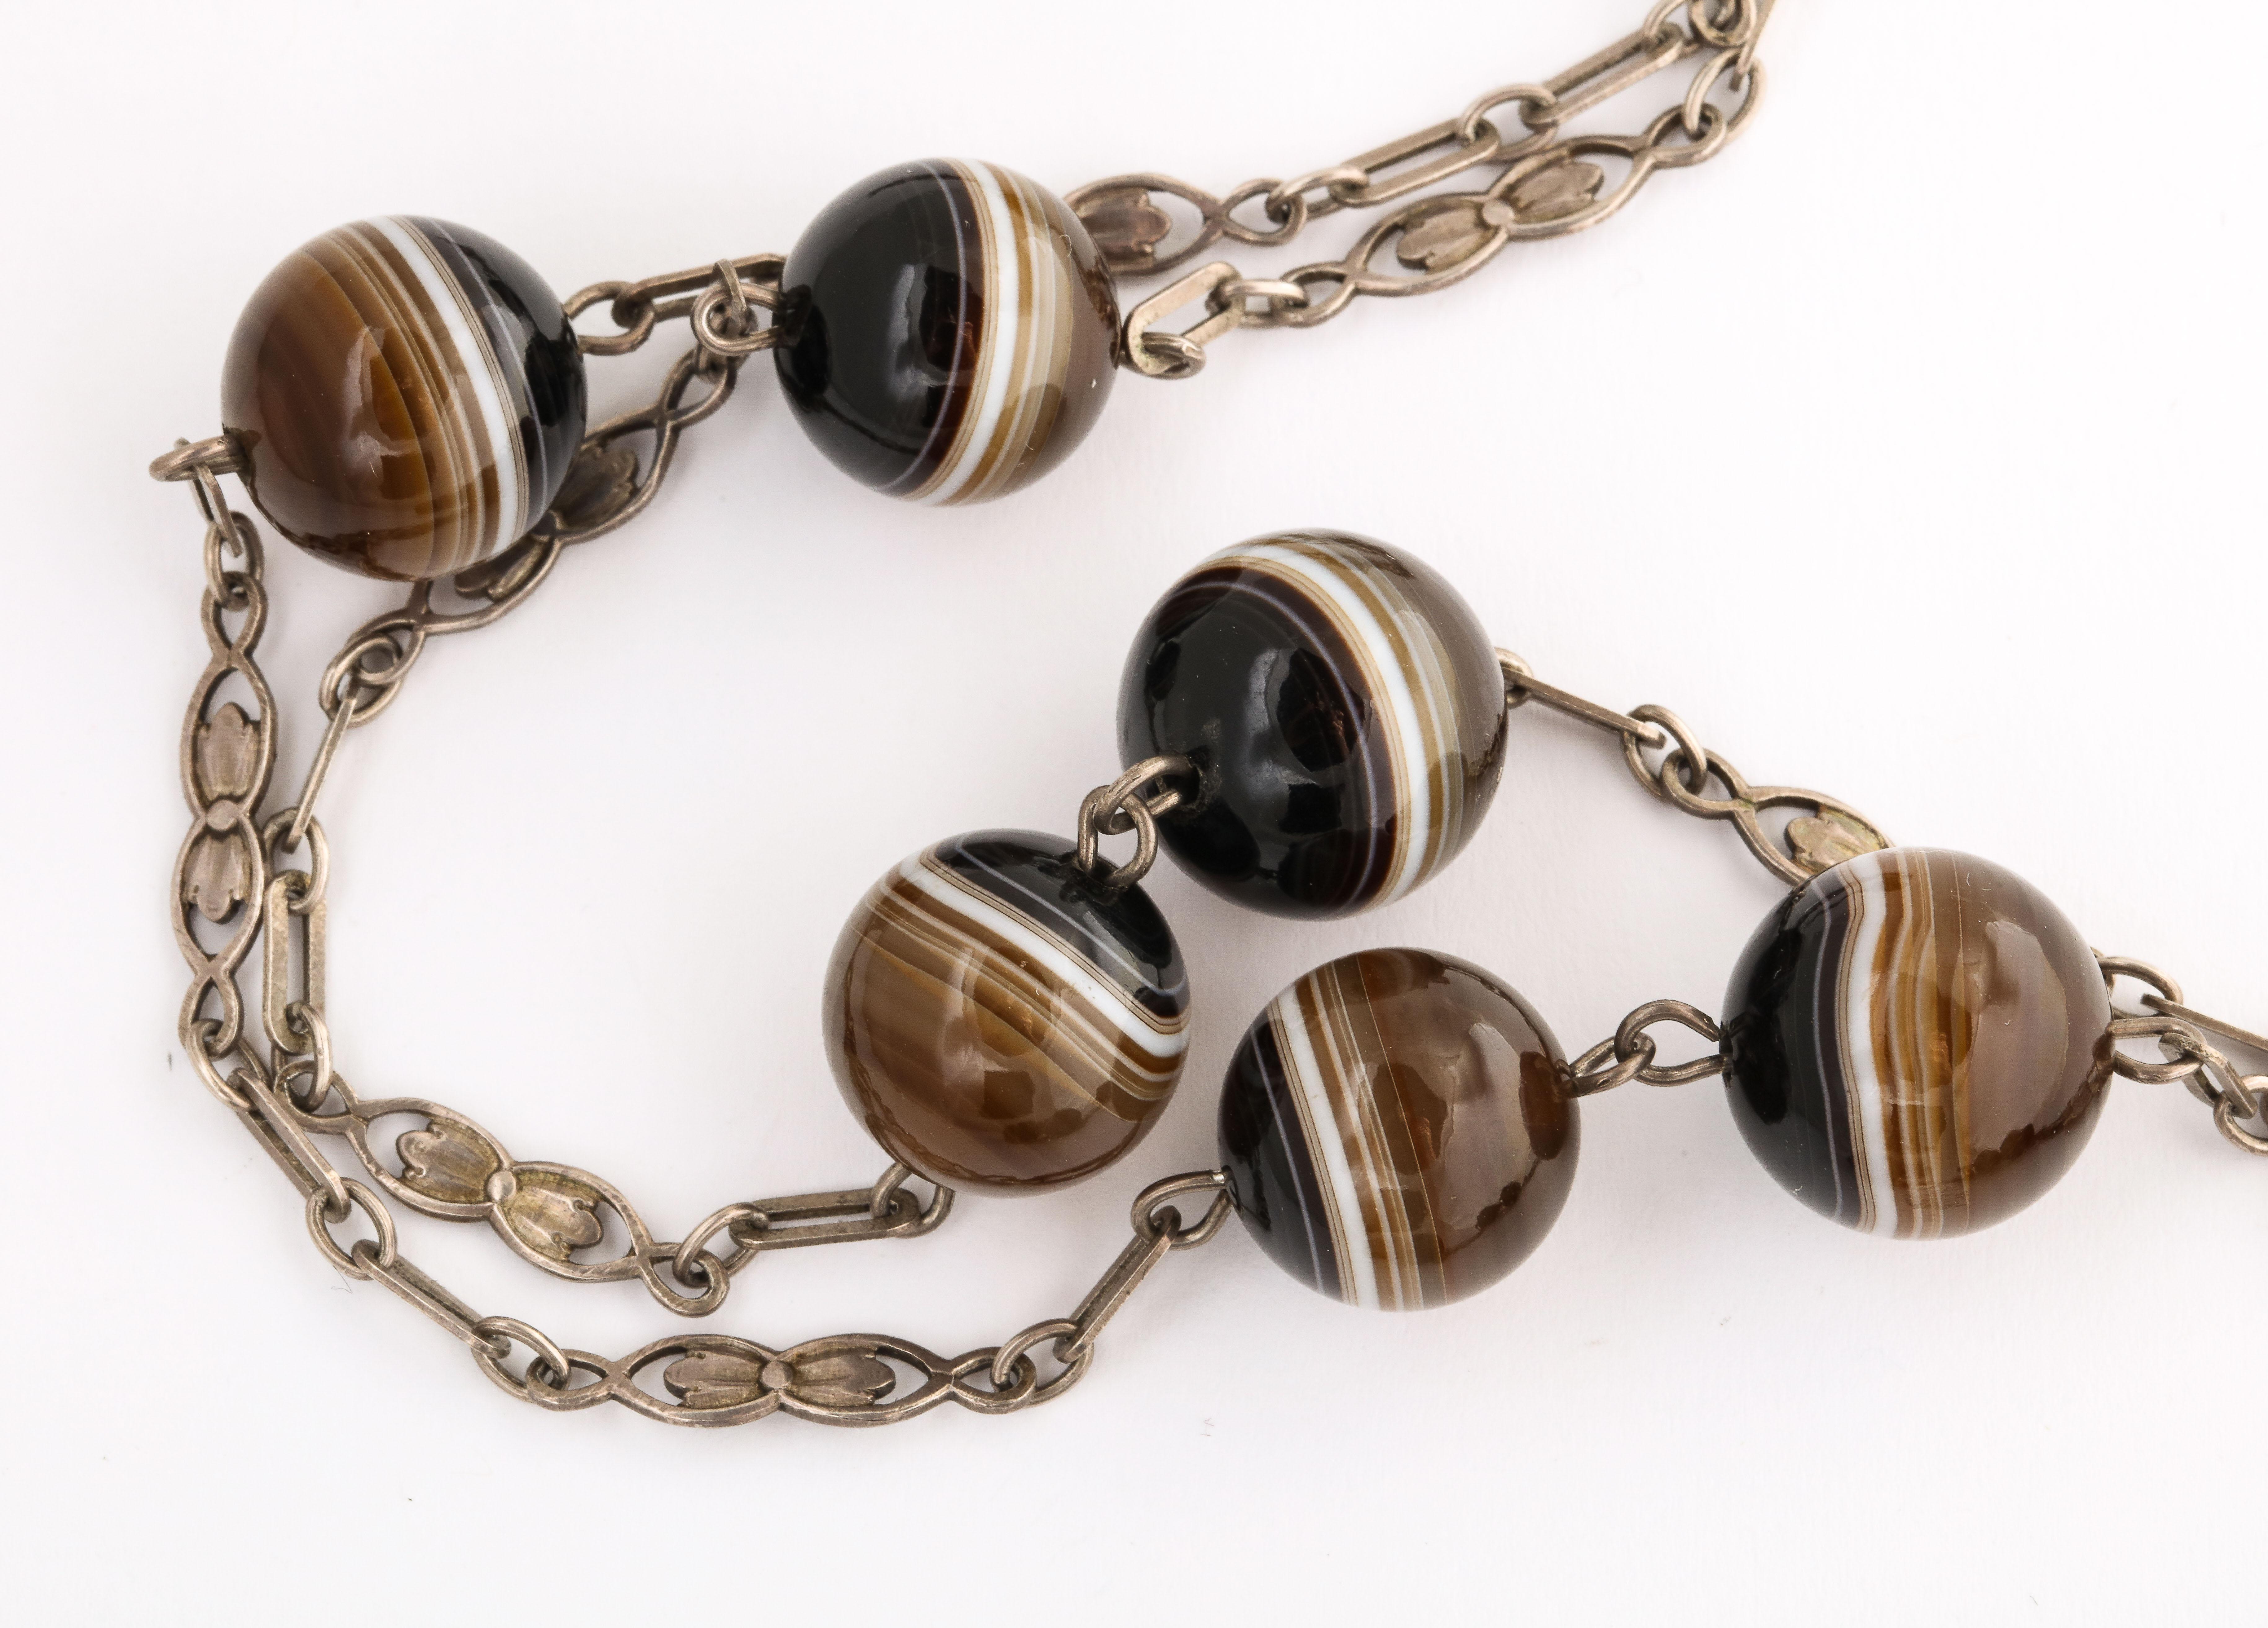 Sturdy alternating links of rectangles and double tulips hold uniform banded agate beads. The distance between the agates vary sometimes kissing cousins sometimes three inches apart and other times five inches apart. The agate balls are brown, white